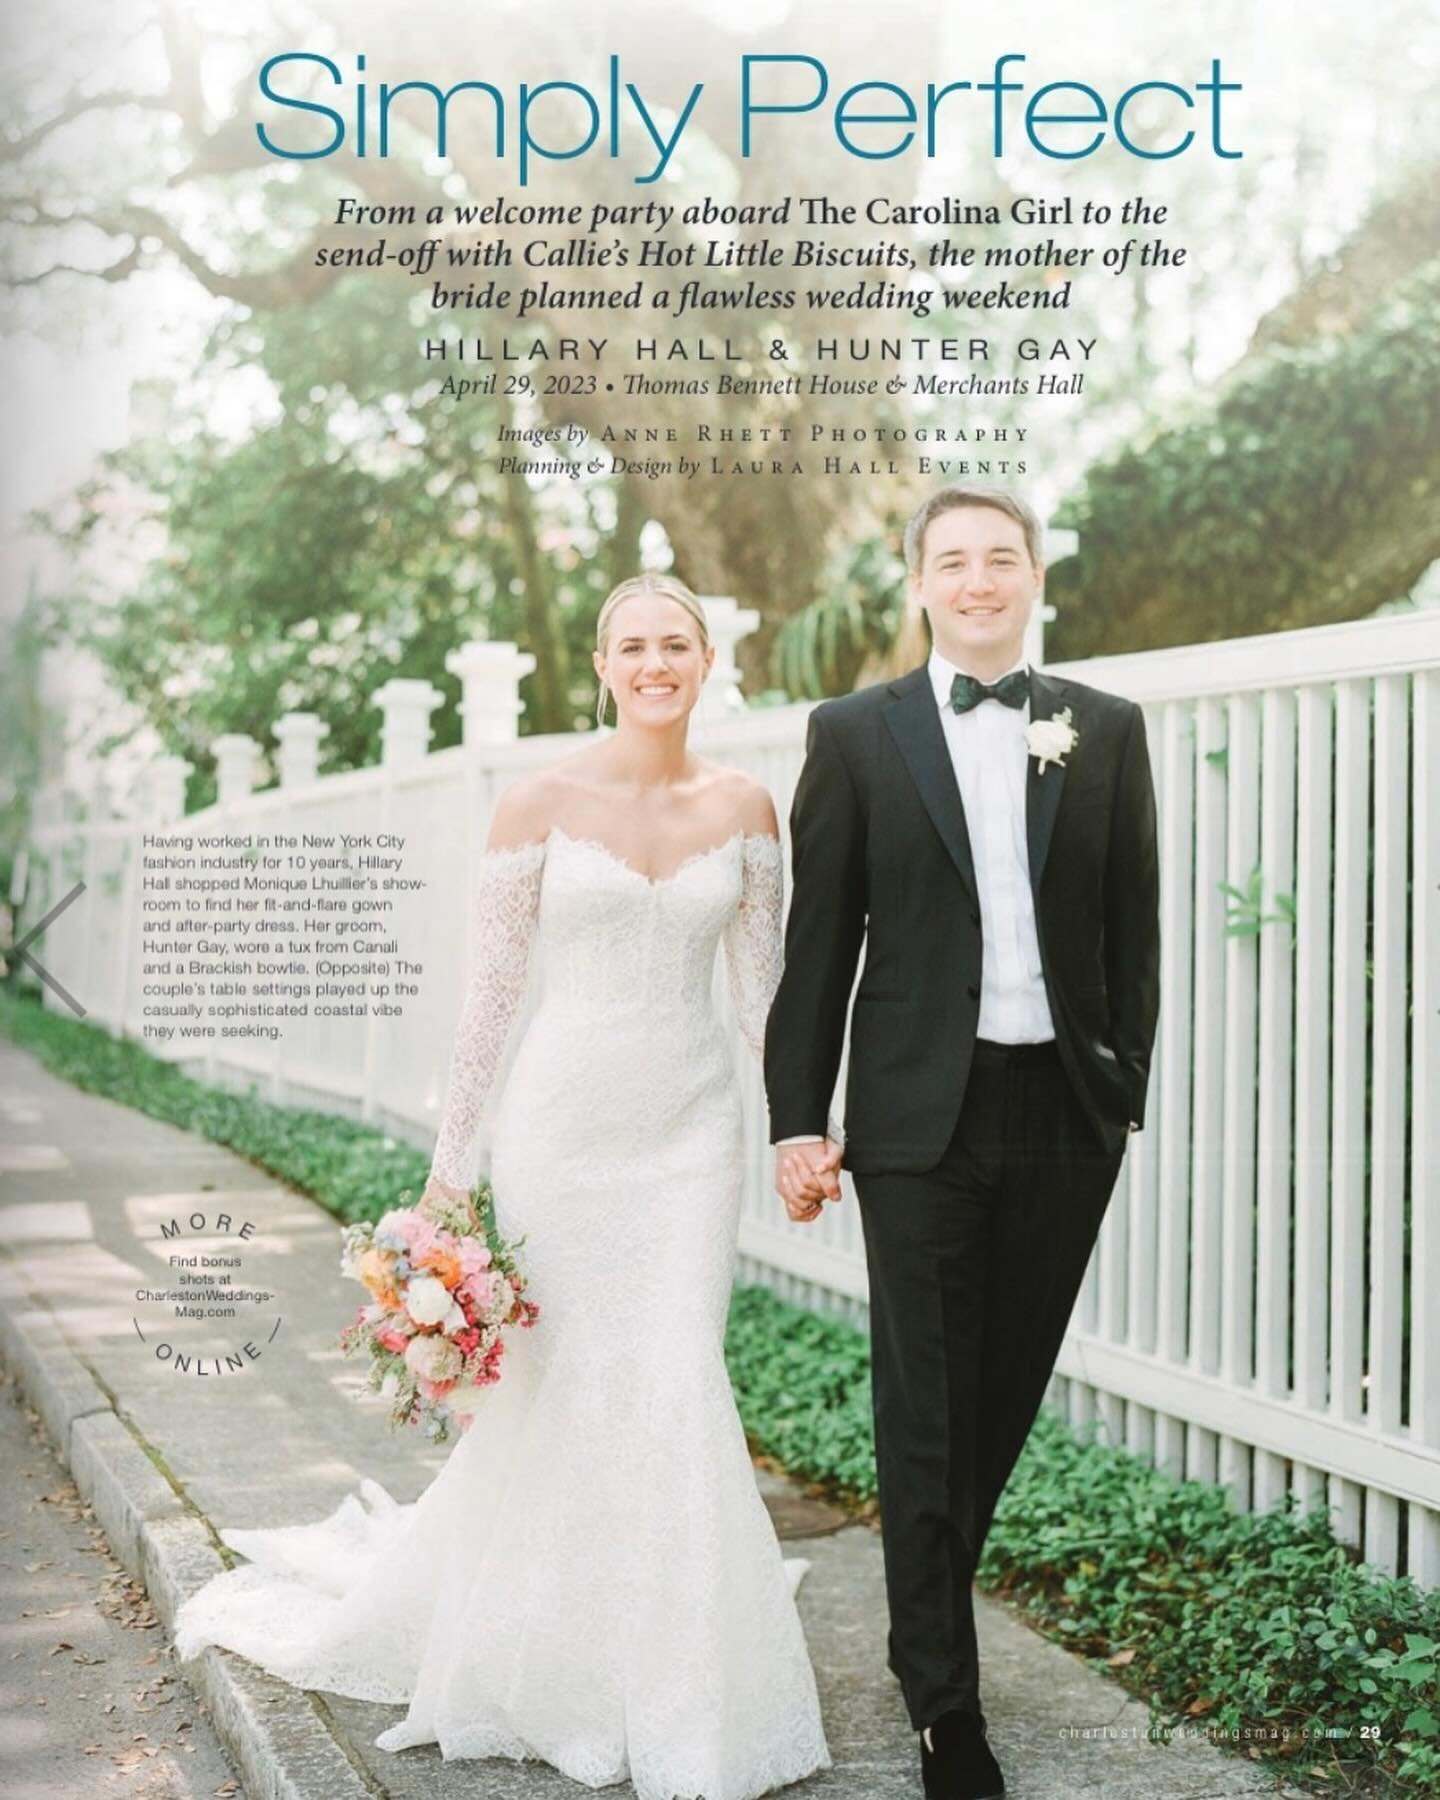 We are so thrilled that this beautiful wedding is featured in this month&rsquo;s issue of Charleston Weddings Magazine! Thank you to all the vendors who helped bring the couples vision to life! ✨ @charlestonweddings @charlestonmag 

Planning: @laurah